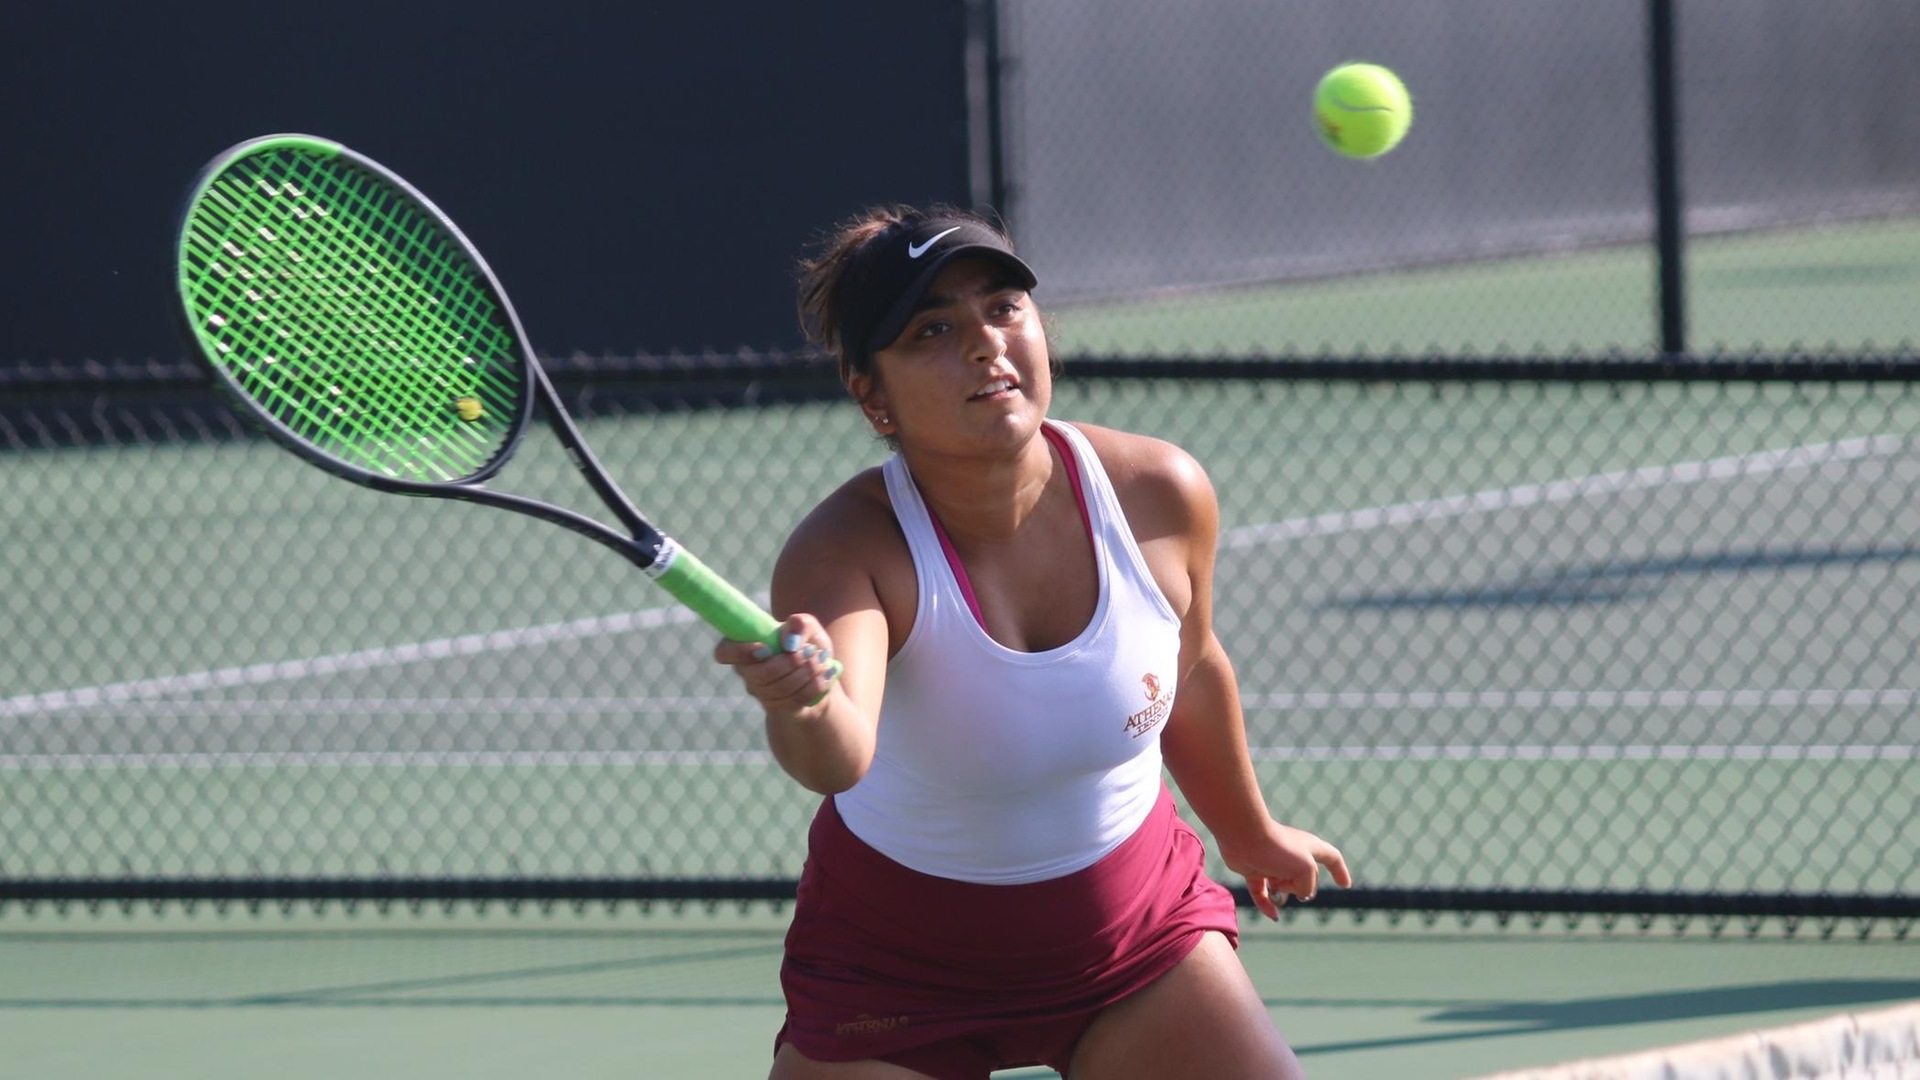 Alisha Chulani knocked off the No. 2 seed in singles to advance to the quarterfinals